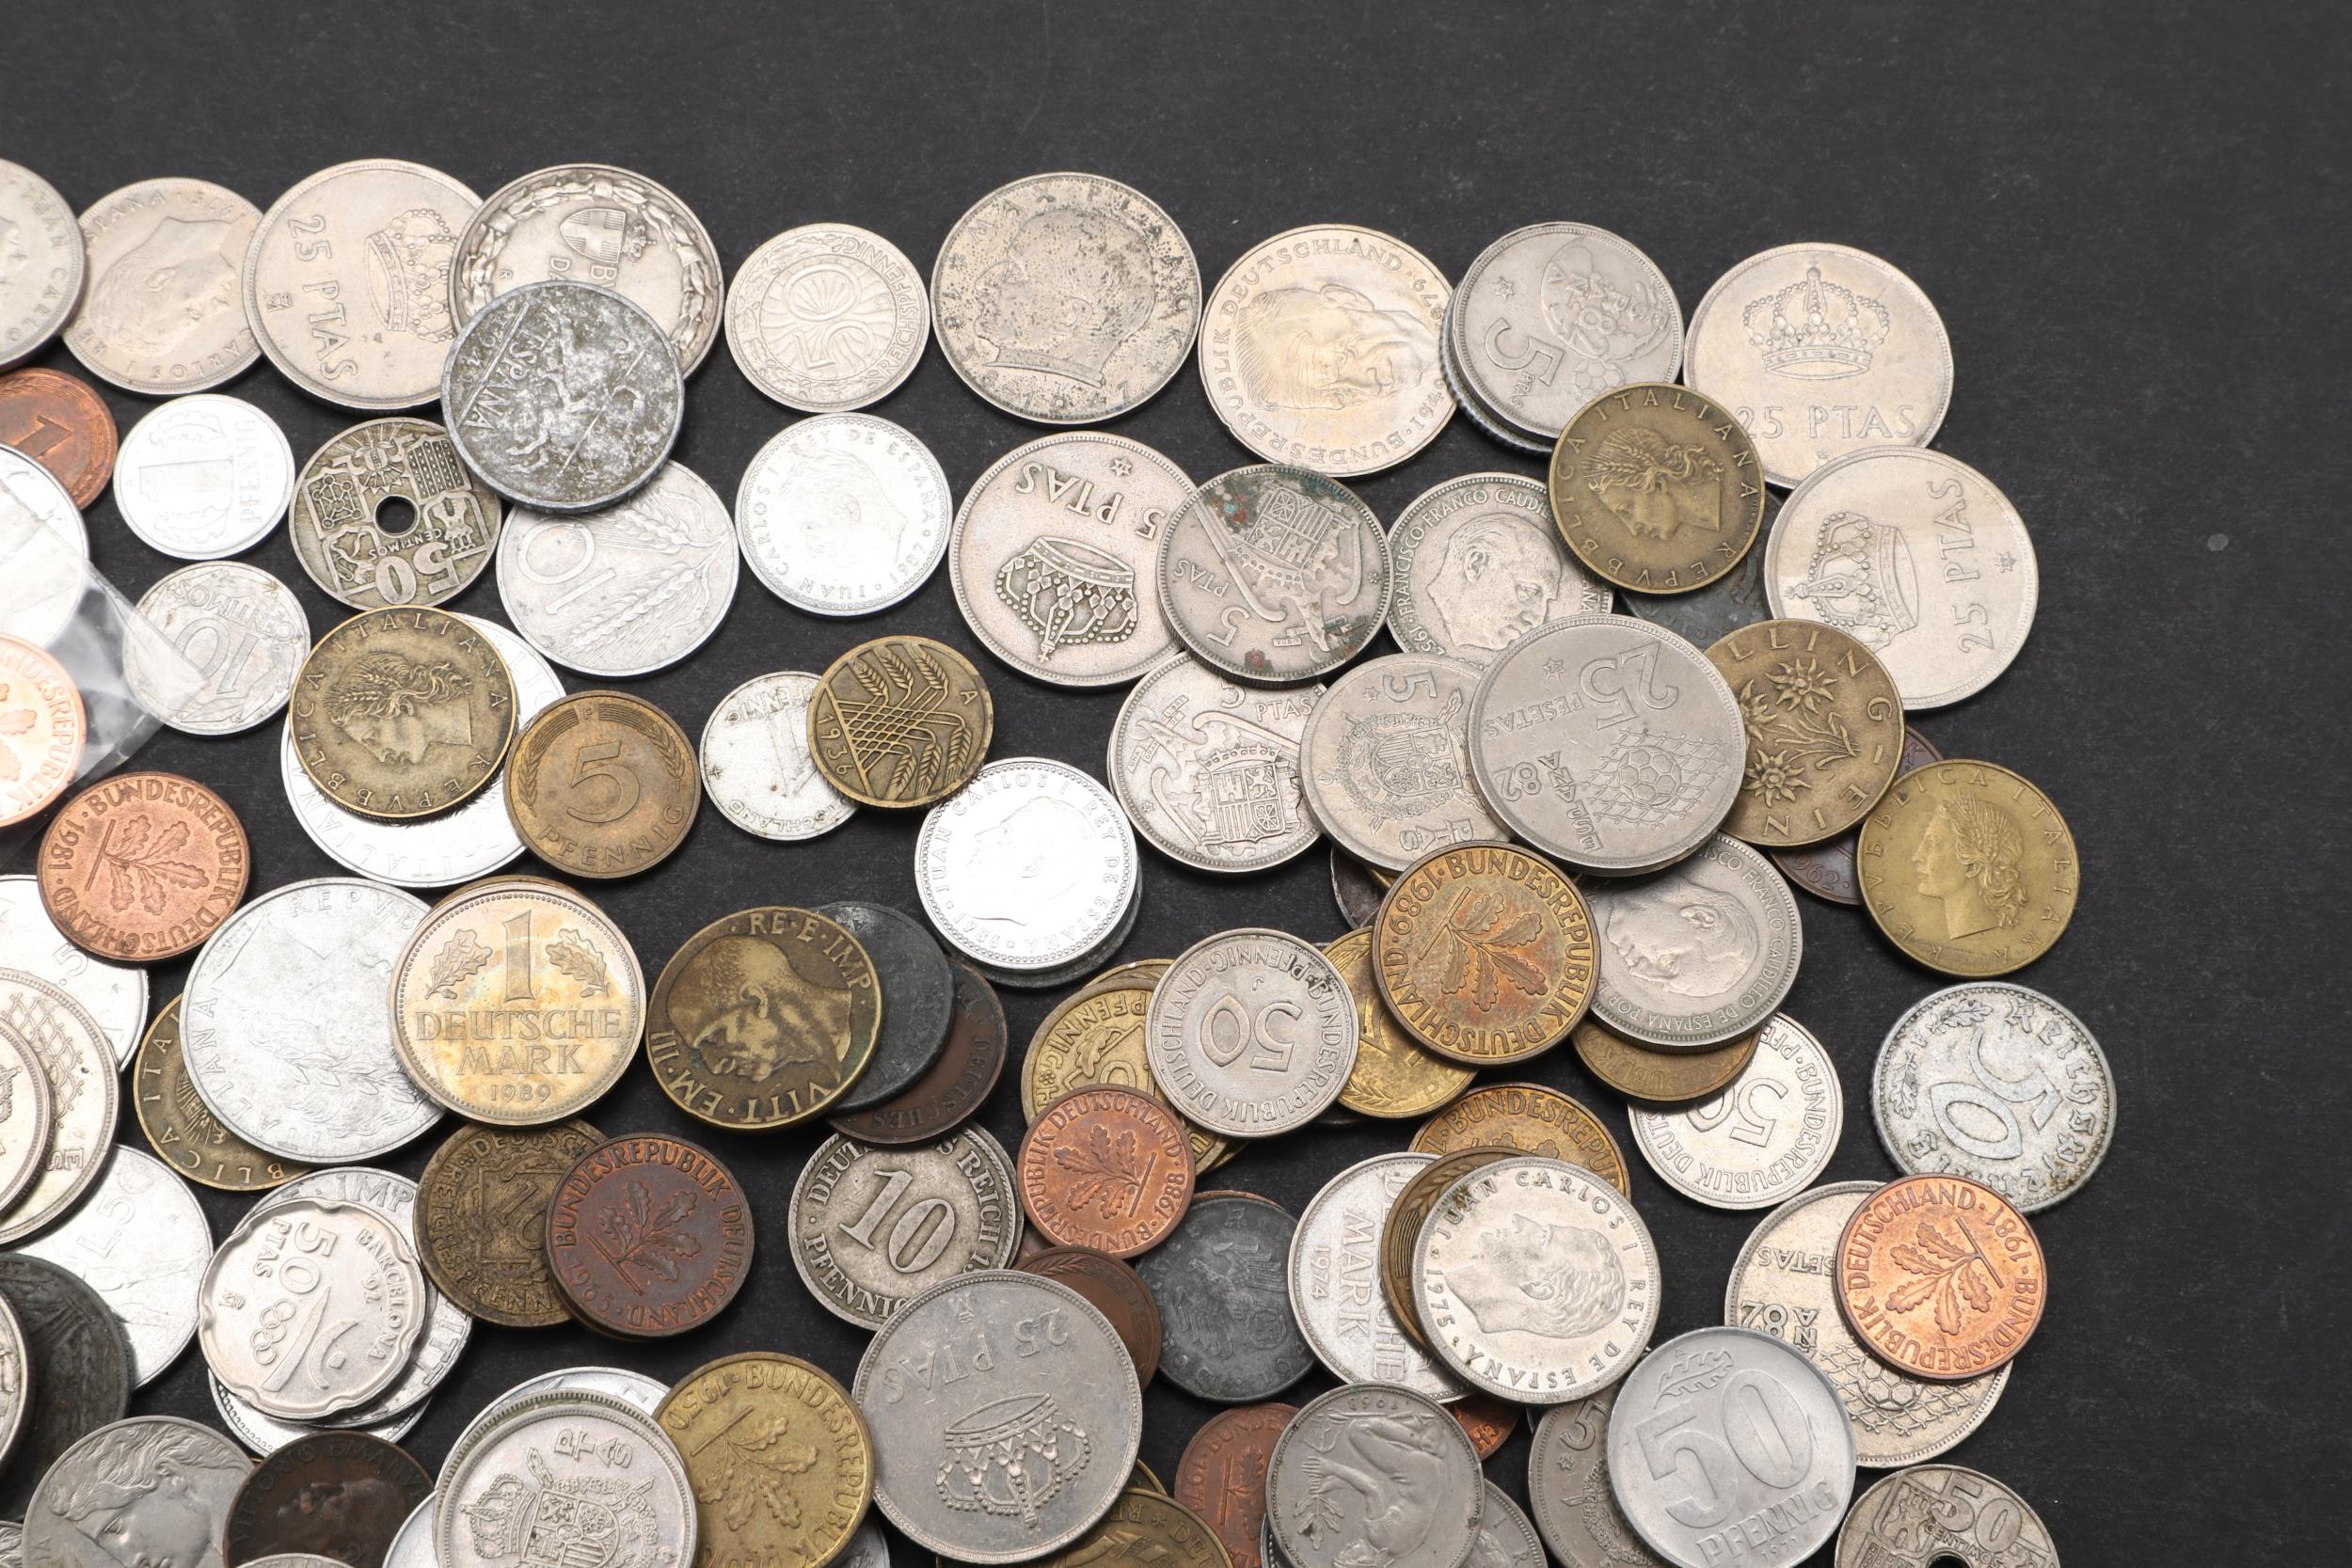 A LARGE COLLECTION OF 19TH AND 20th CENTURY EUROPEAN COINS TO INCLUDE GERMANY, SPAIN AND ITALY. - Image 4 of 10